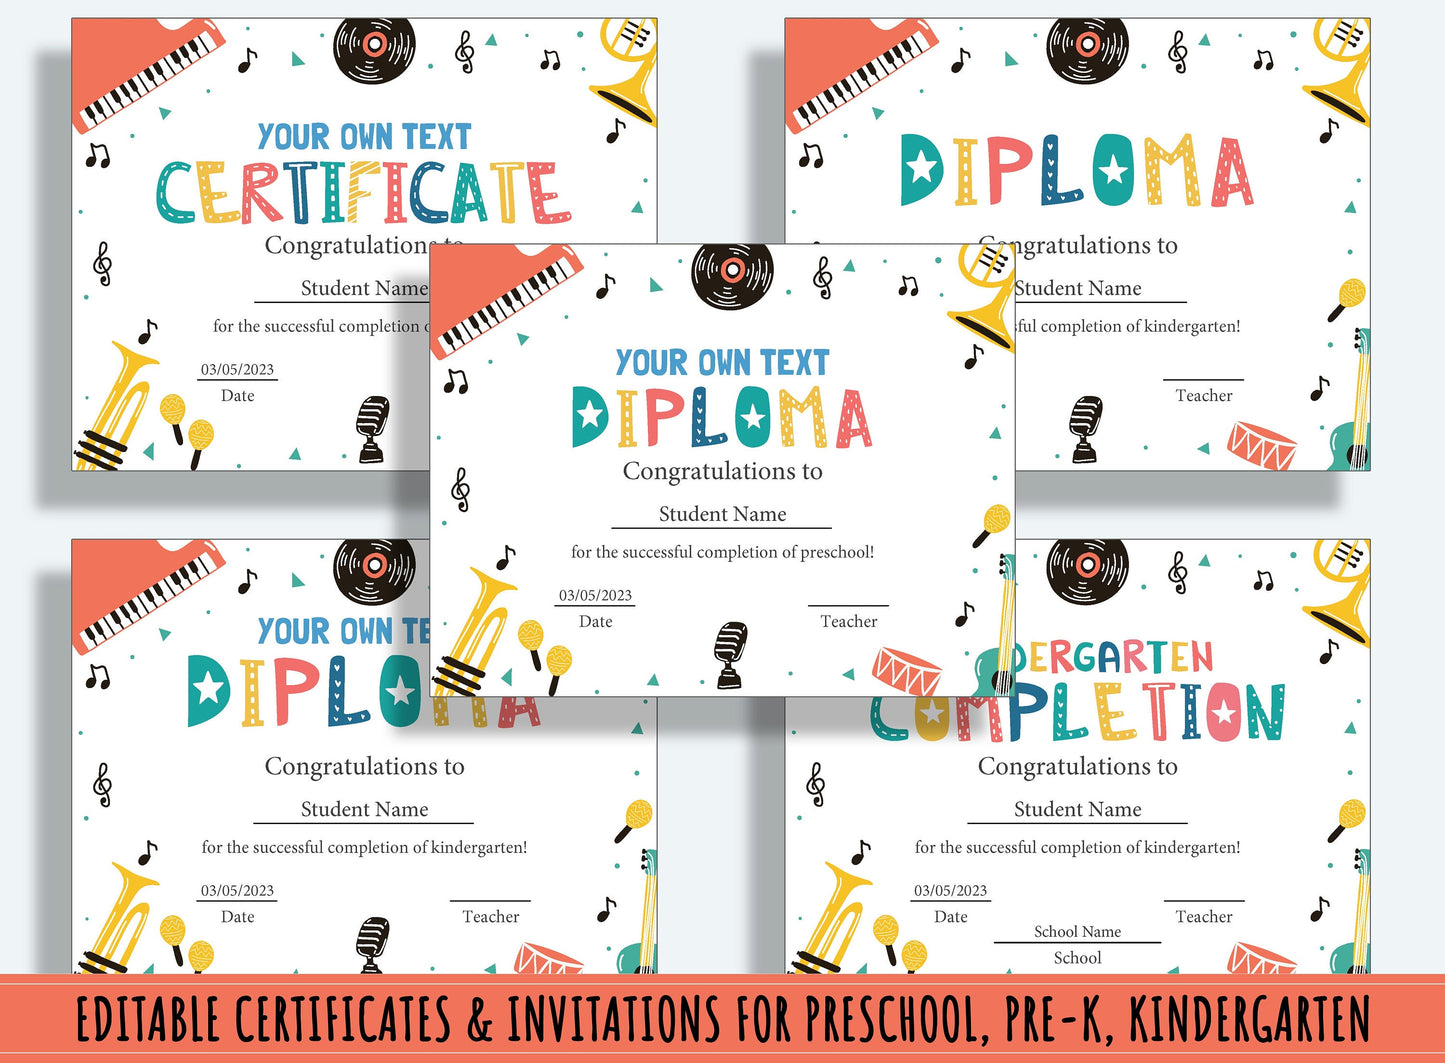 Customizable Diplomas, Certificates, and Invitations for Preschool and Kindergarten Graduations - 37 Pages, PDF File Instant Download